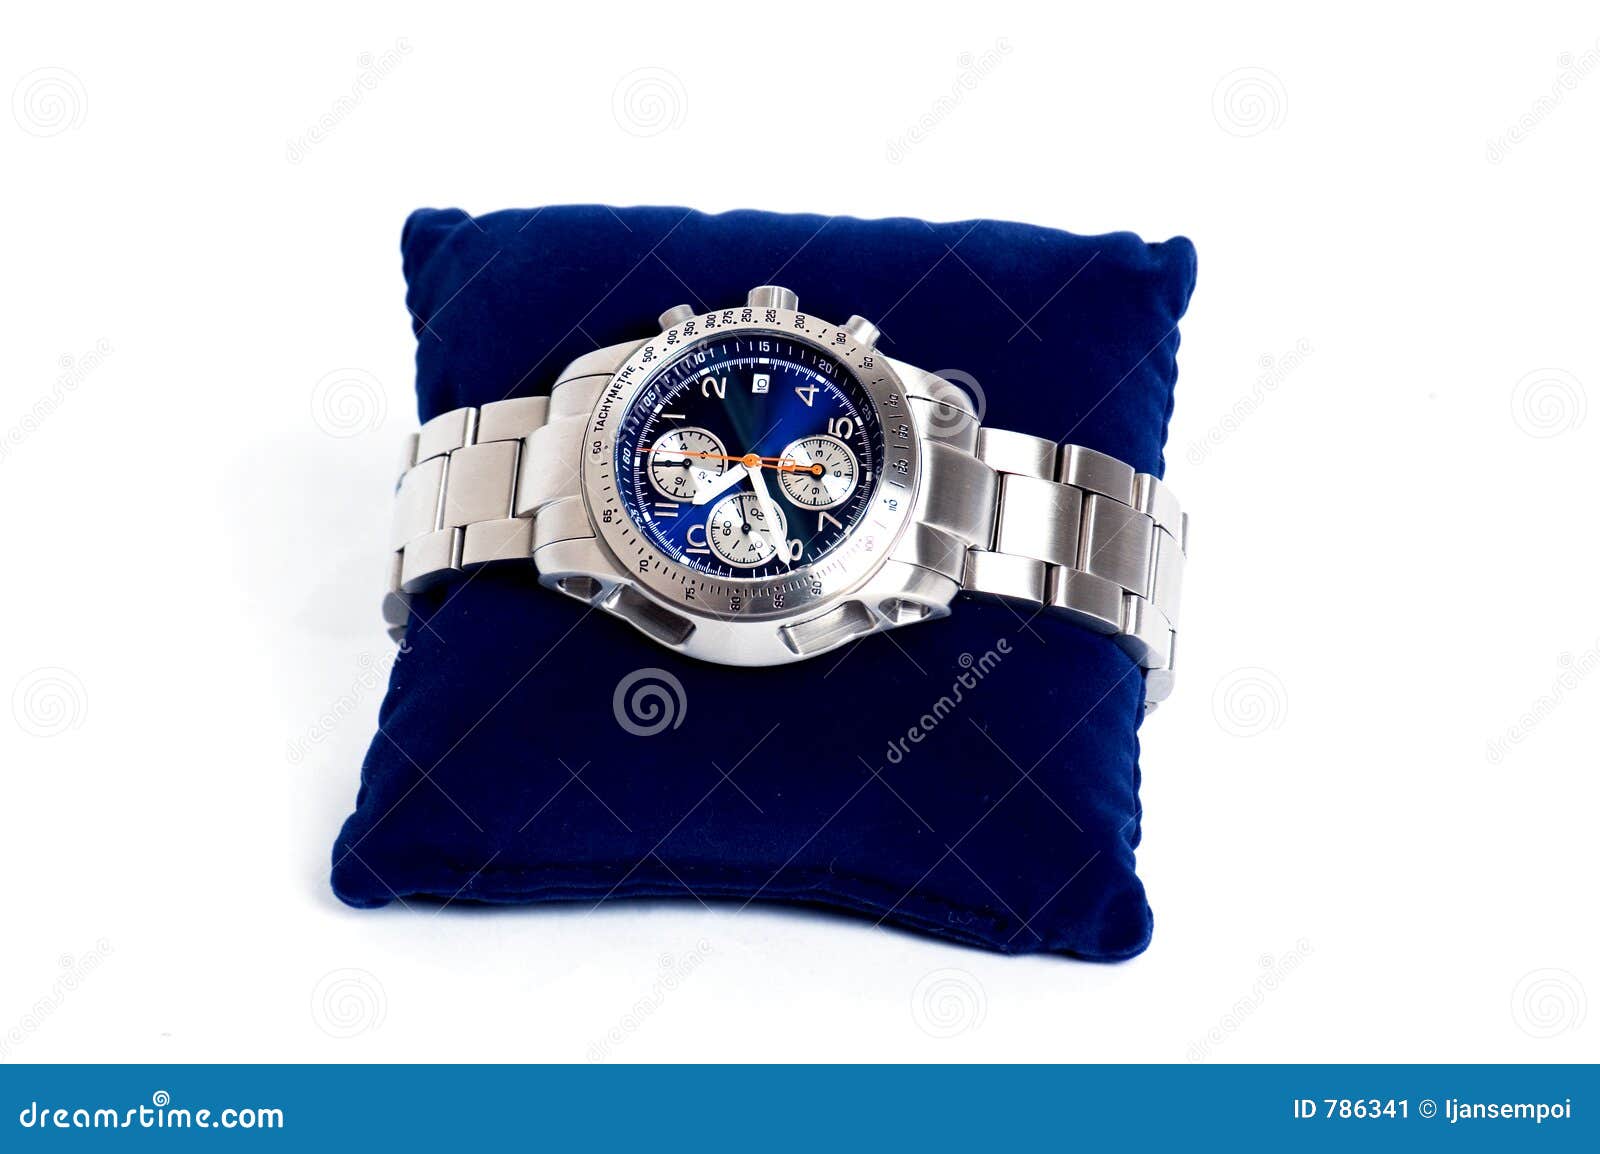 gift - watch